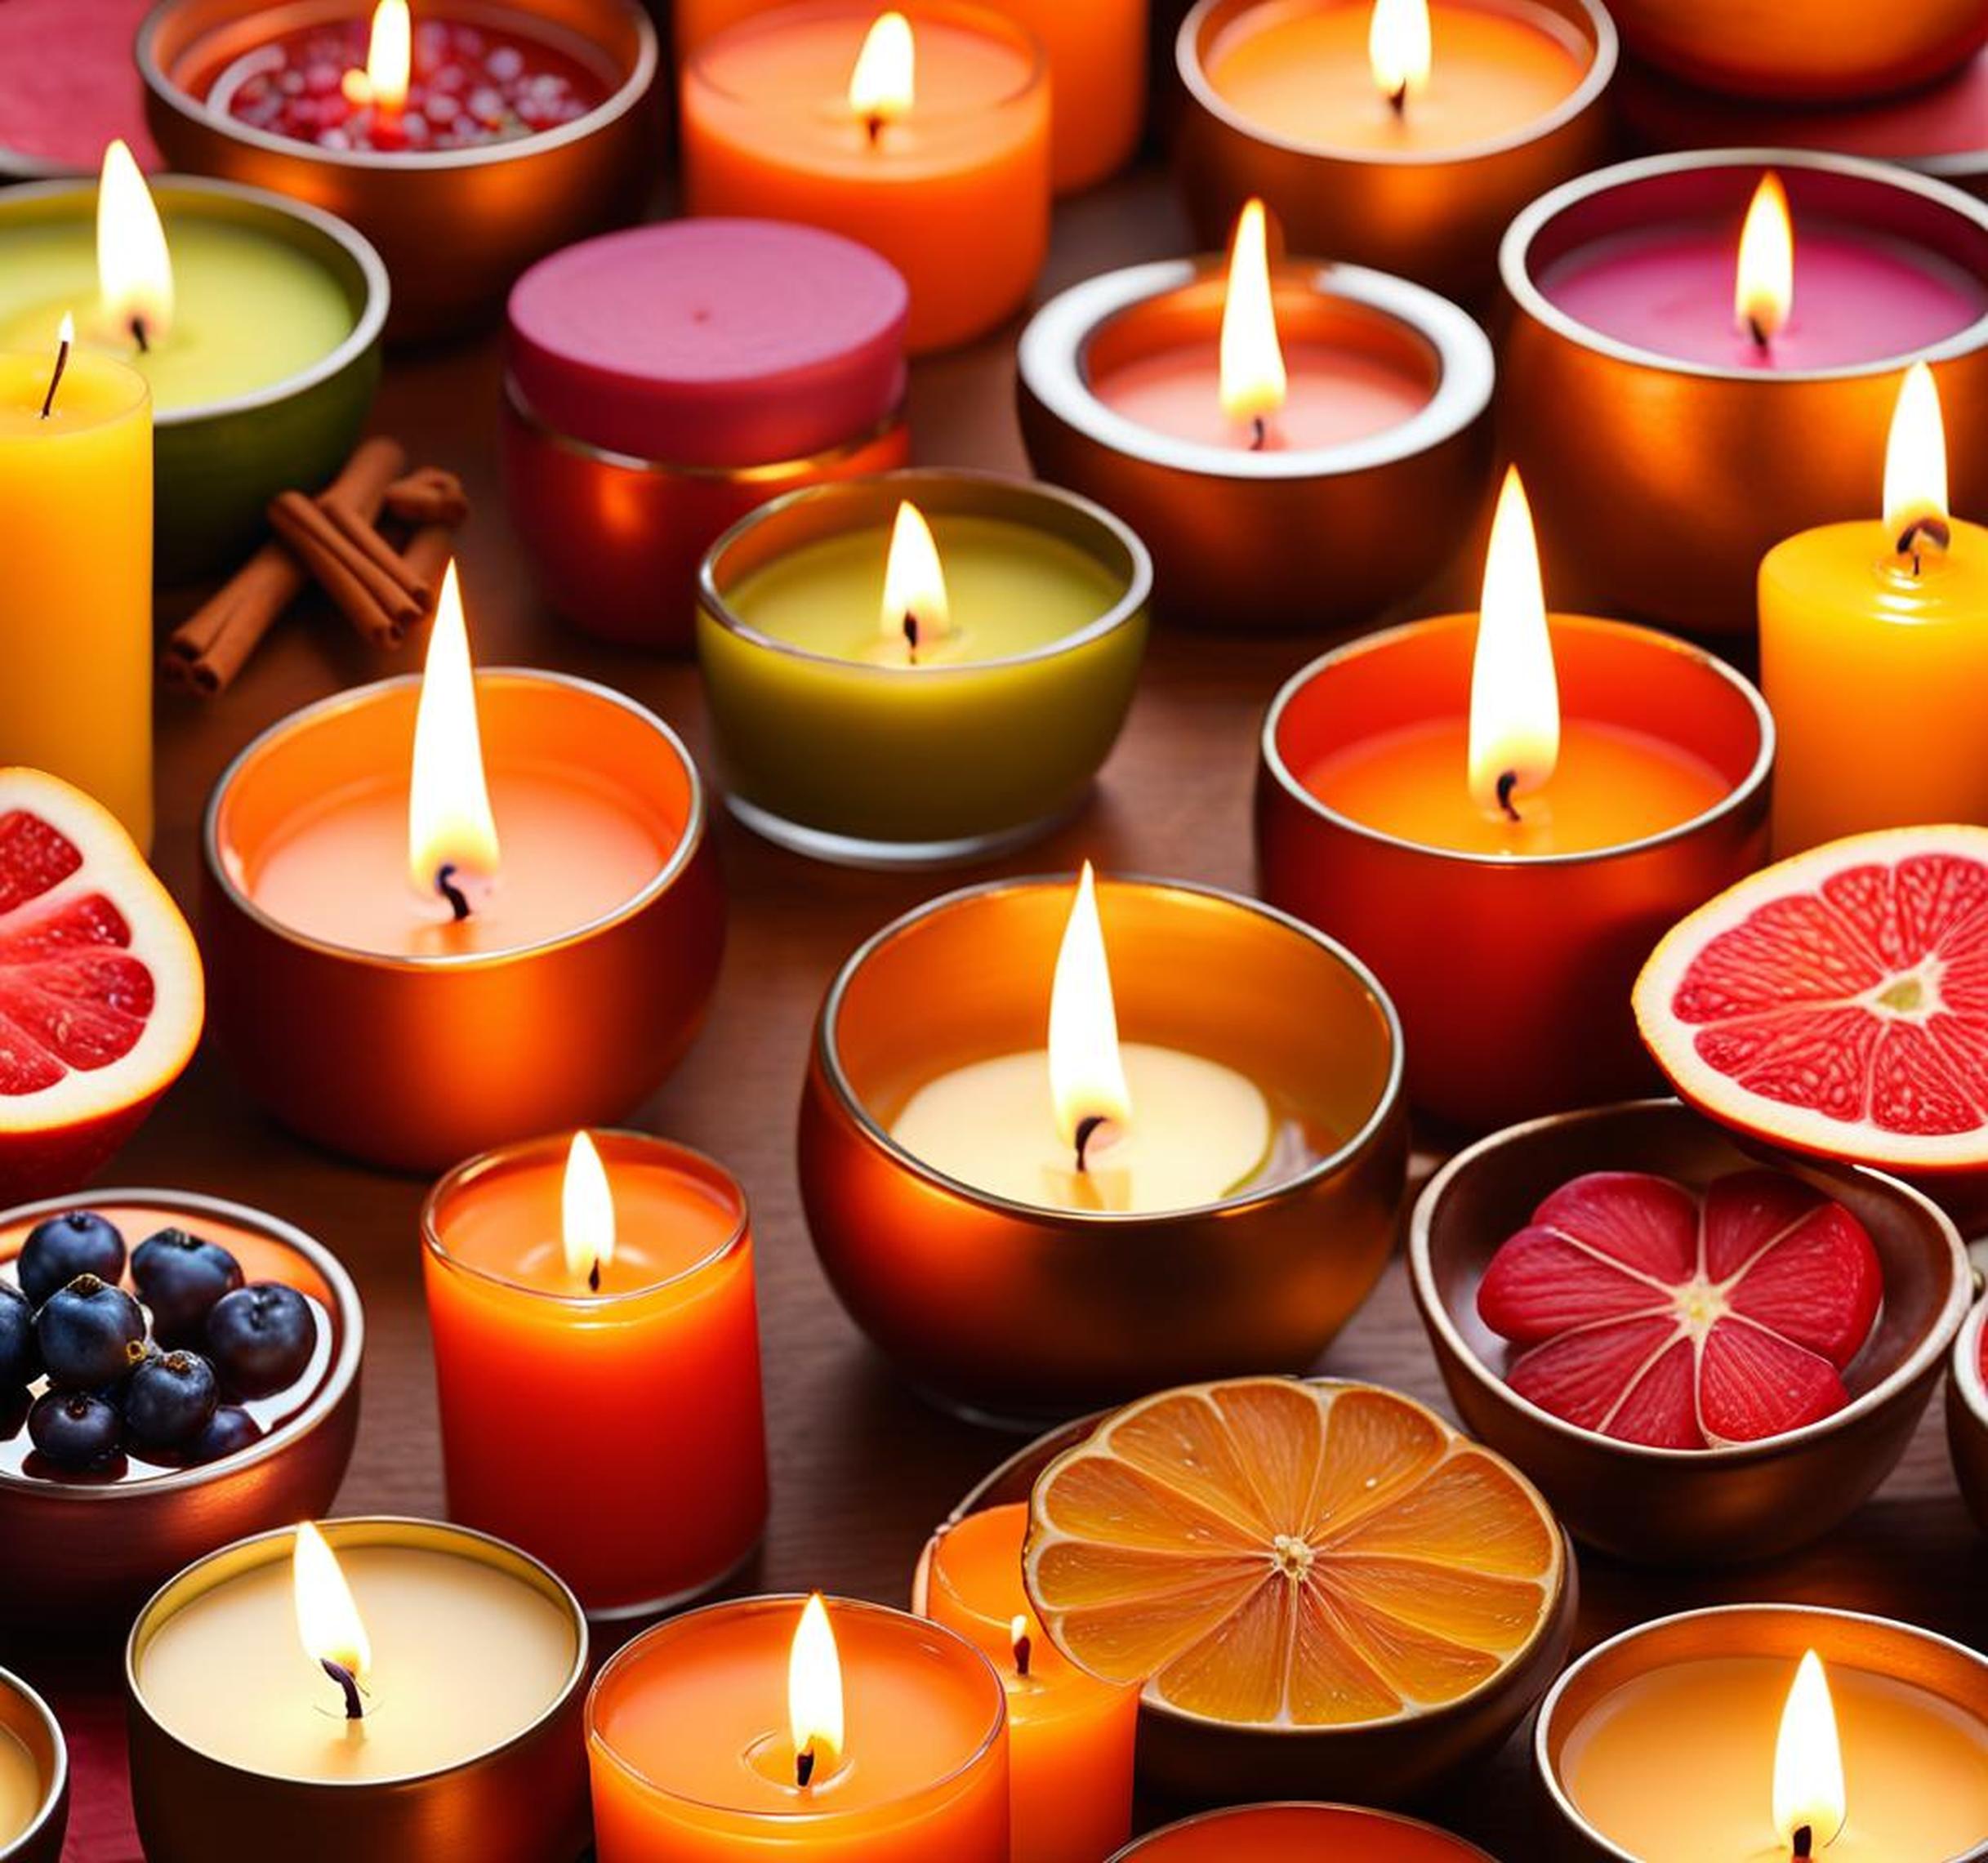 types of candle scents